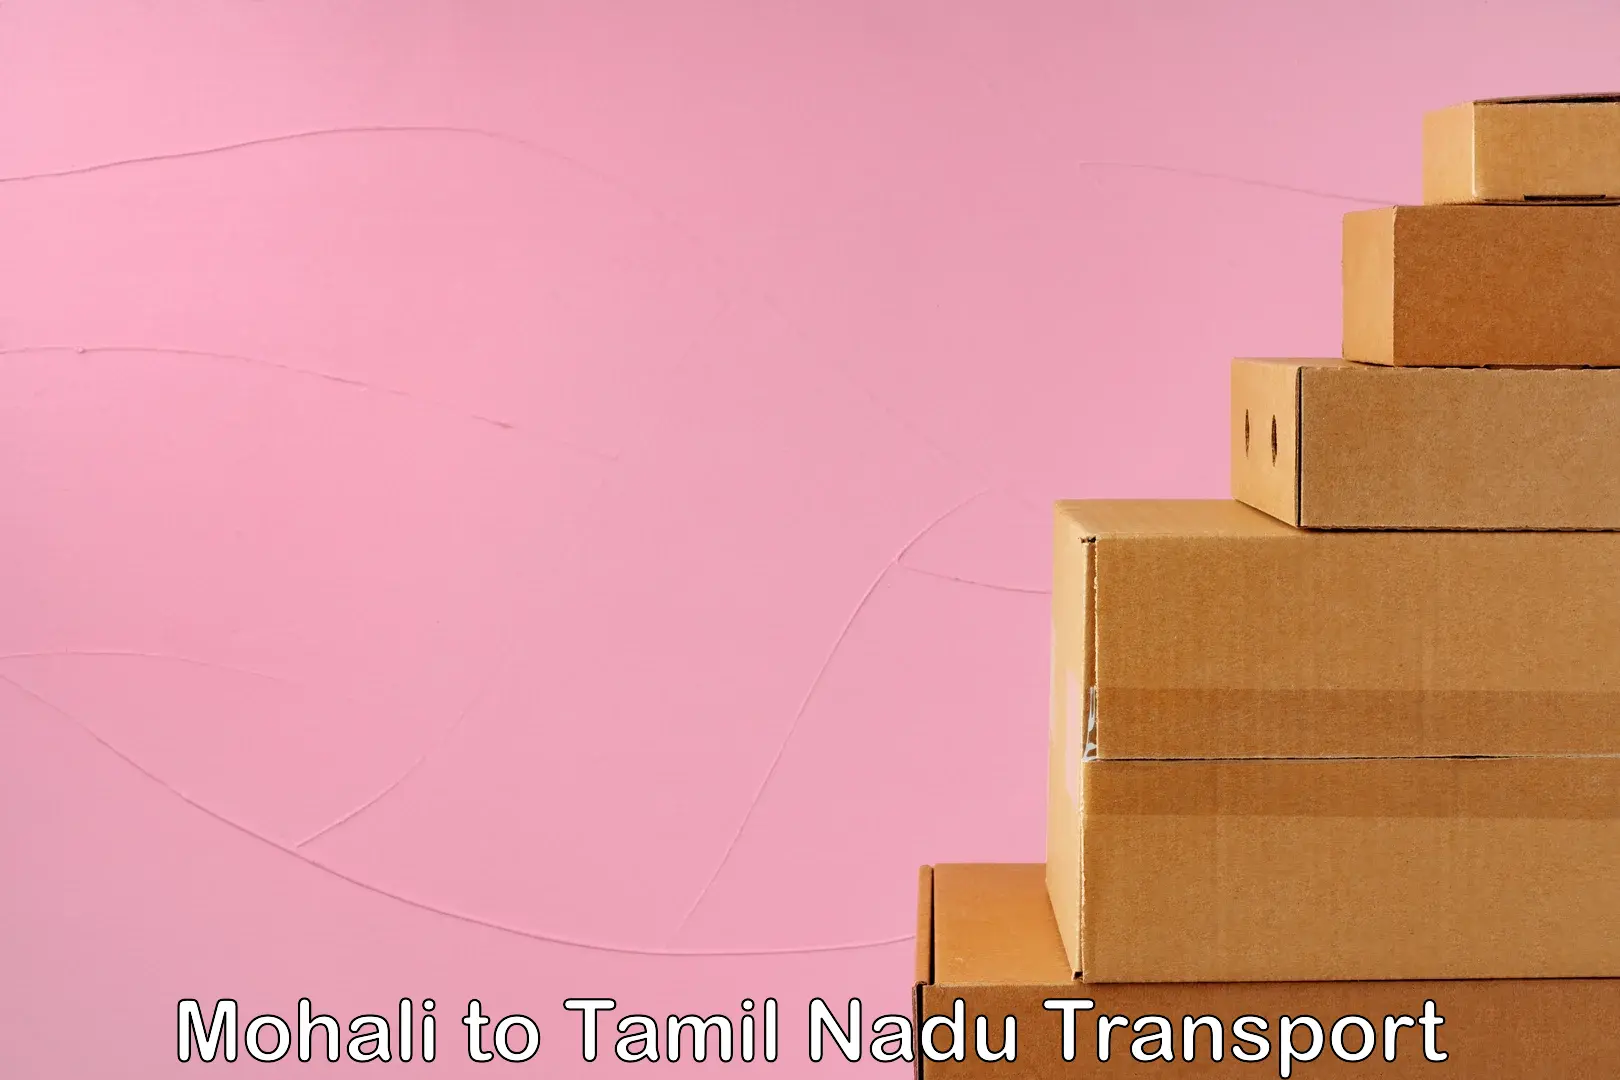 Truck transport companies in India Mohali to Anthiyur